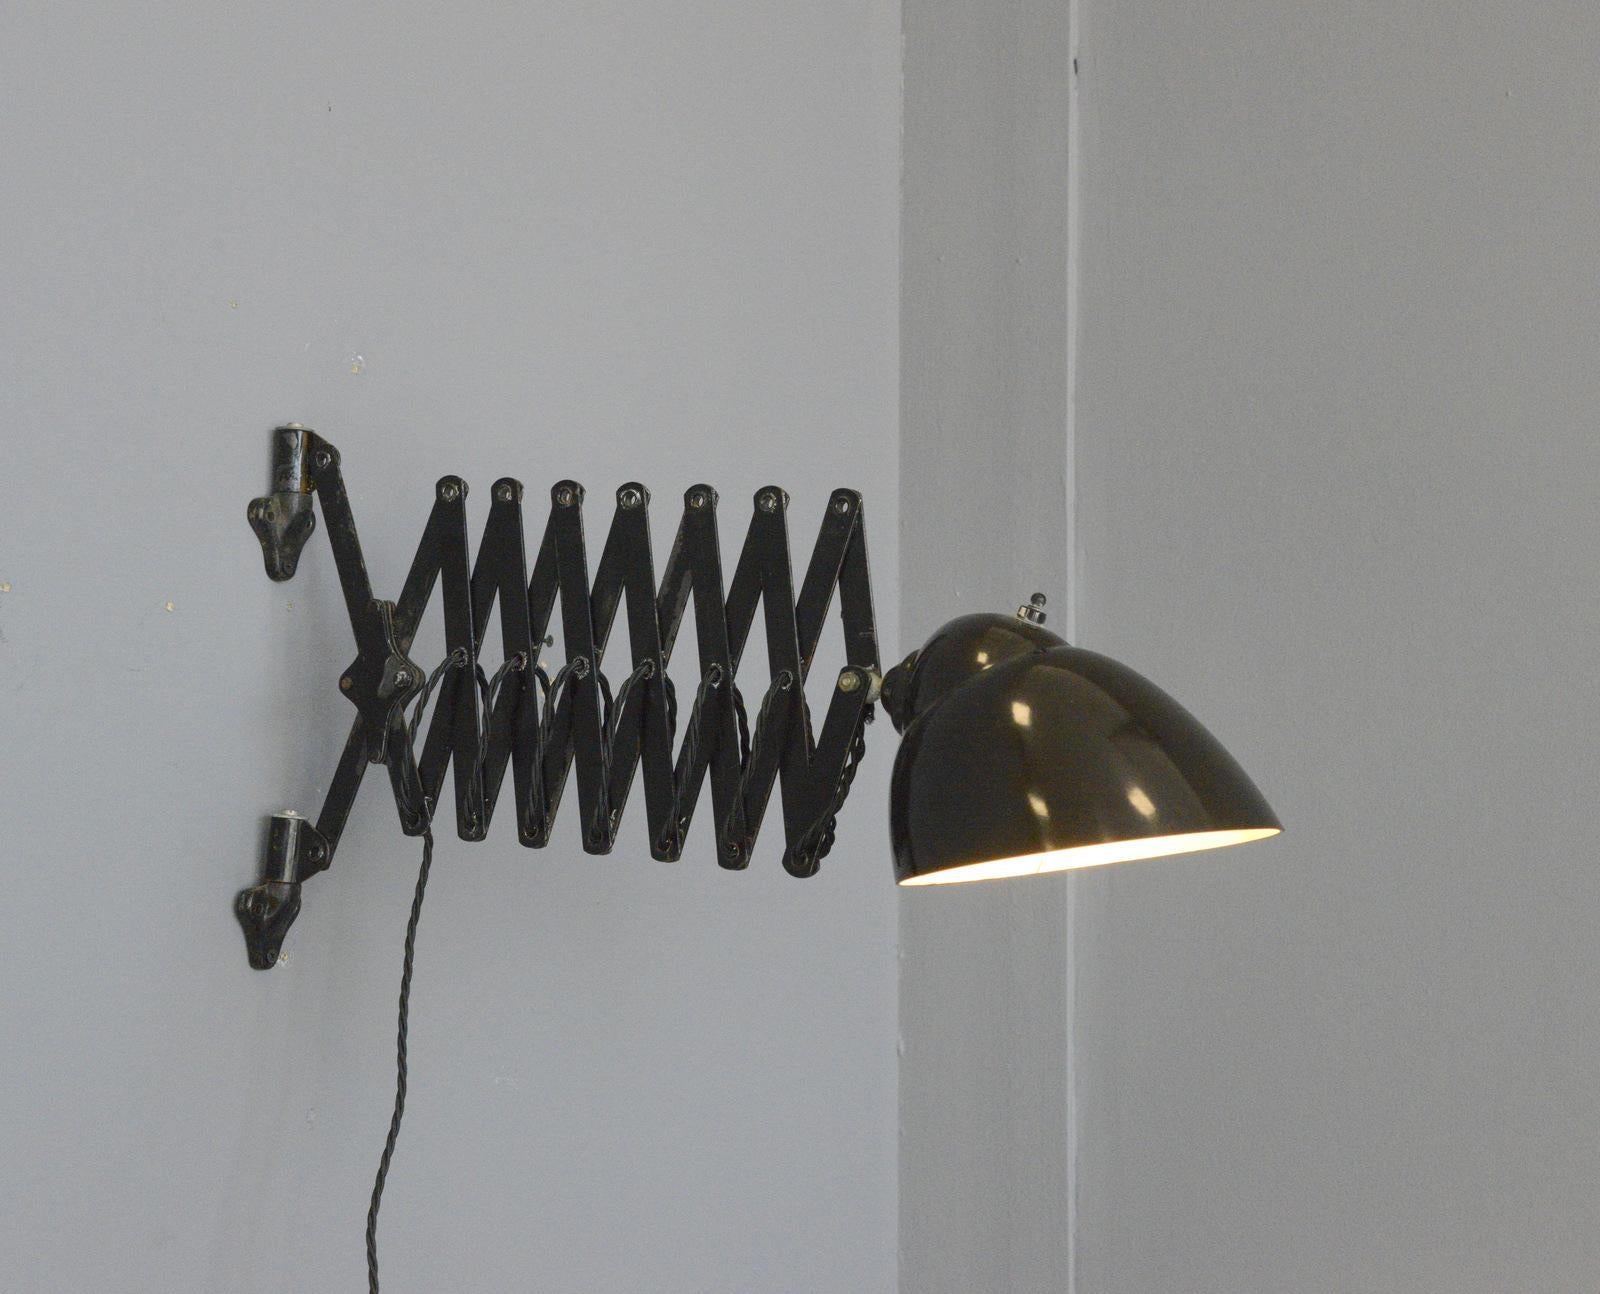 Wall mounted German scissor lamp, circa 1920s

- Bakelite shade
- Cast iron feet
- Extendable scissor mechanism
- Takes E27 fitting bulbs
- German, 1920s
- Measures: 18cm wide x 30cm tall
- Extends up to 90cm from the wall

Condition